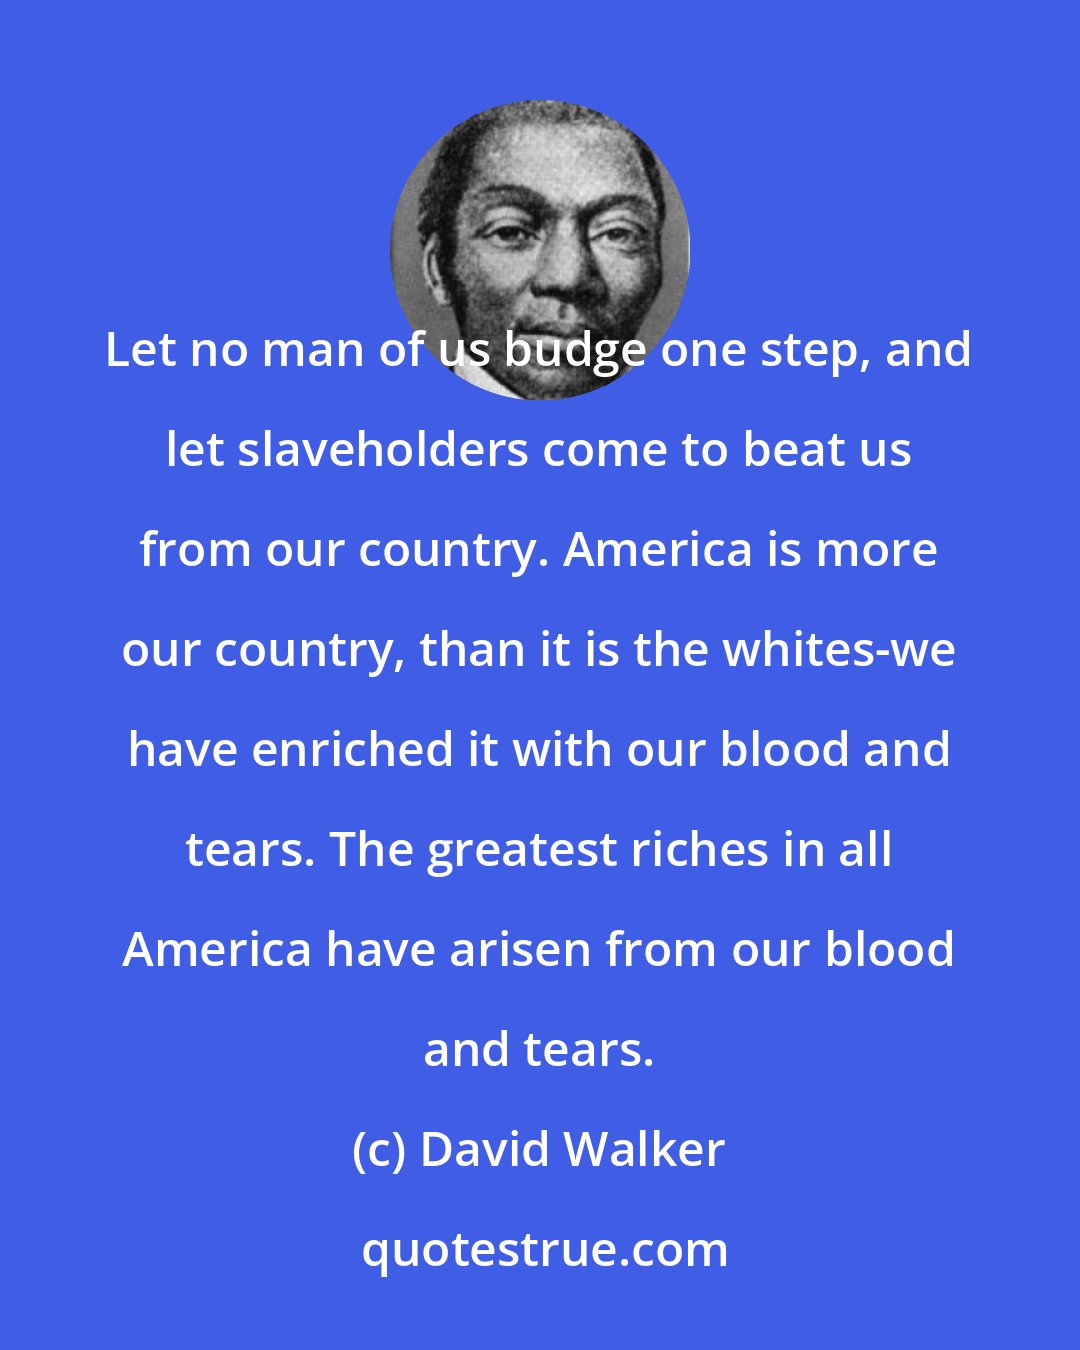 David Walker: Let no man of us budge one step, and let slaveholders come to beat us from our country. America is more our country, than it is the whites-we have enriched it with our blood and tears. The greatest riches in all America have arisen from our blood and tears.